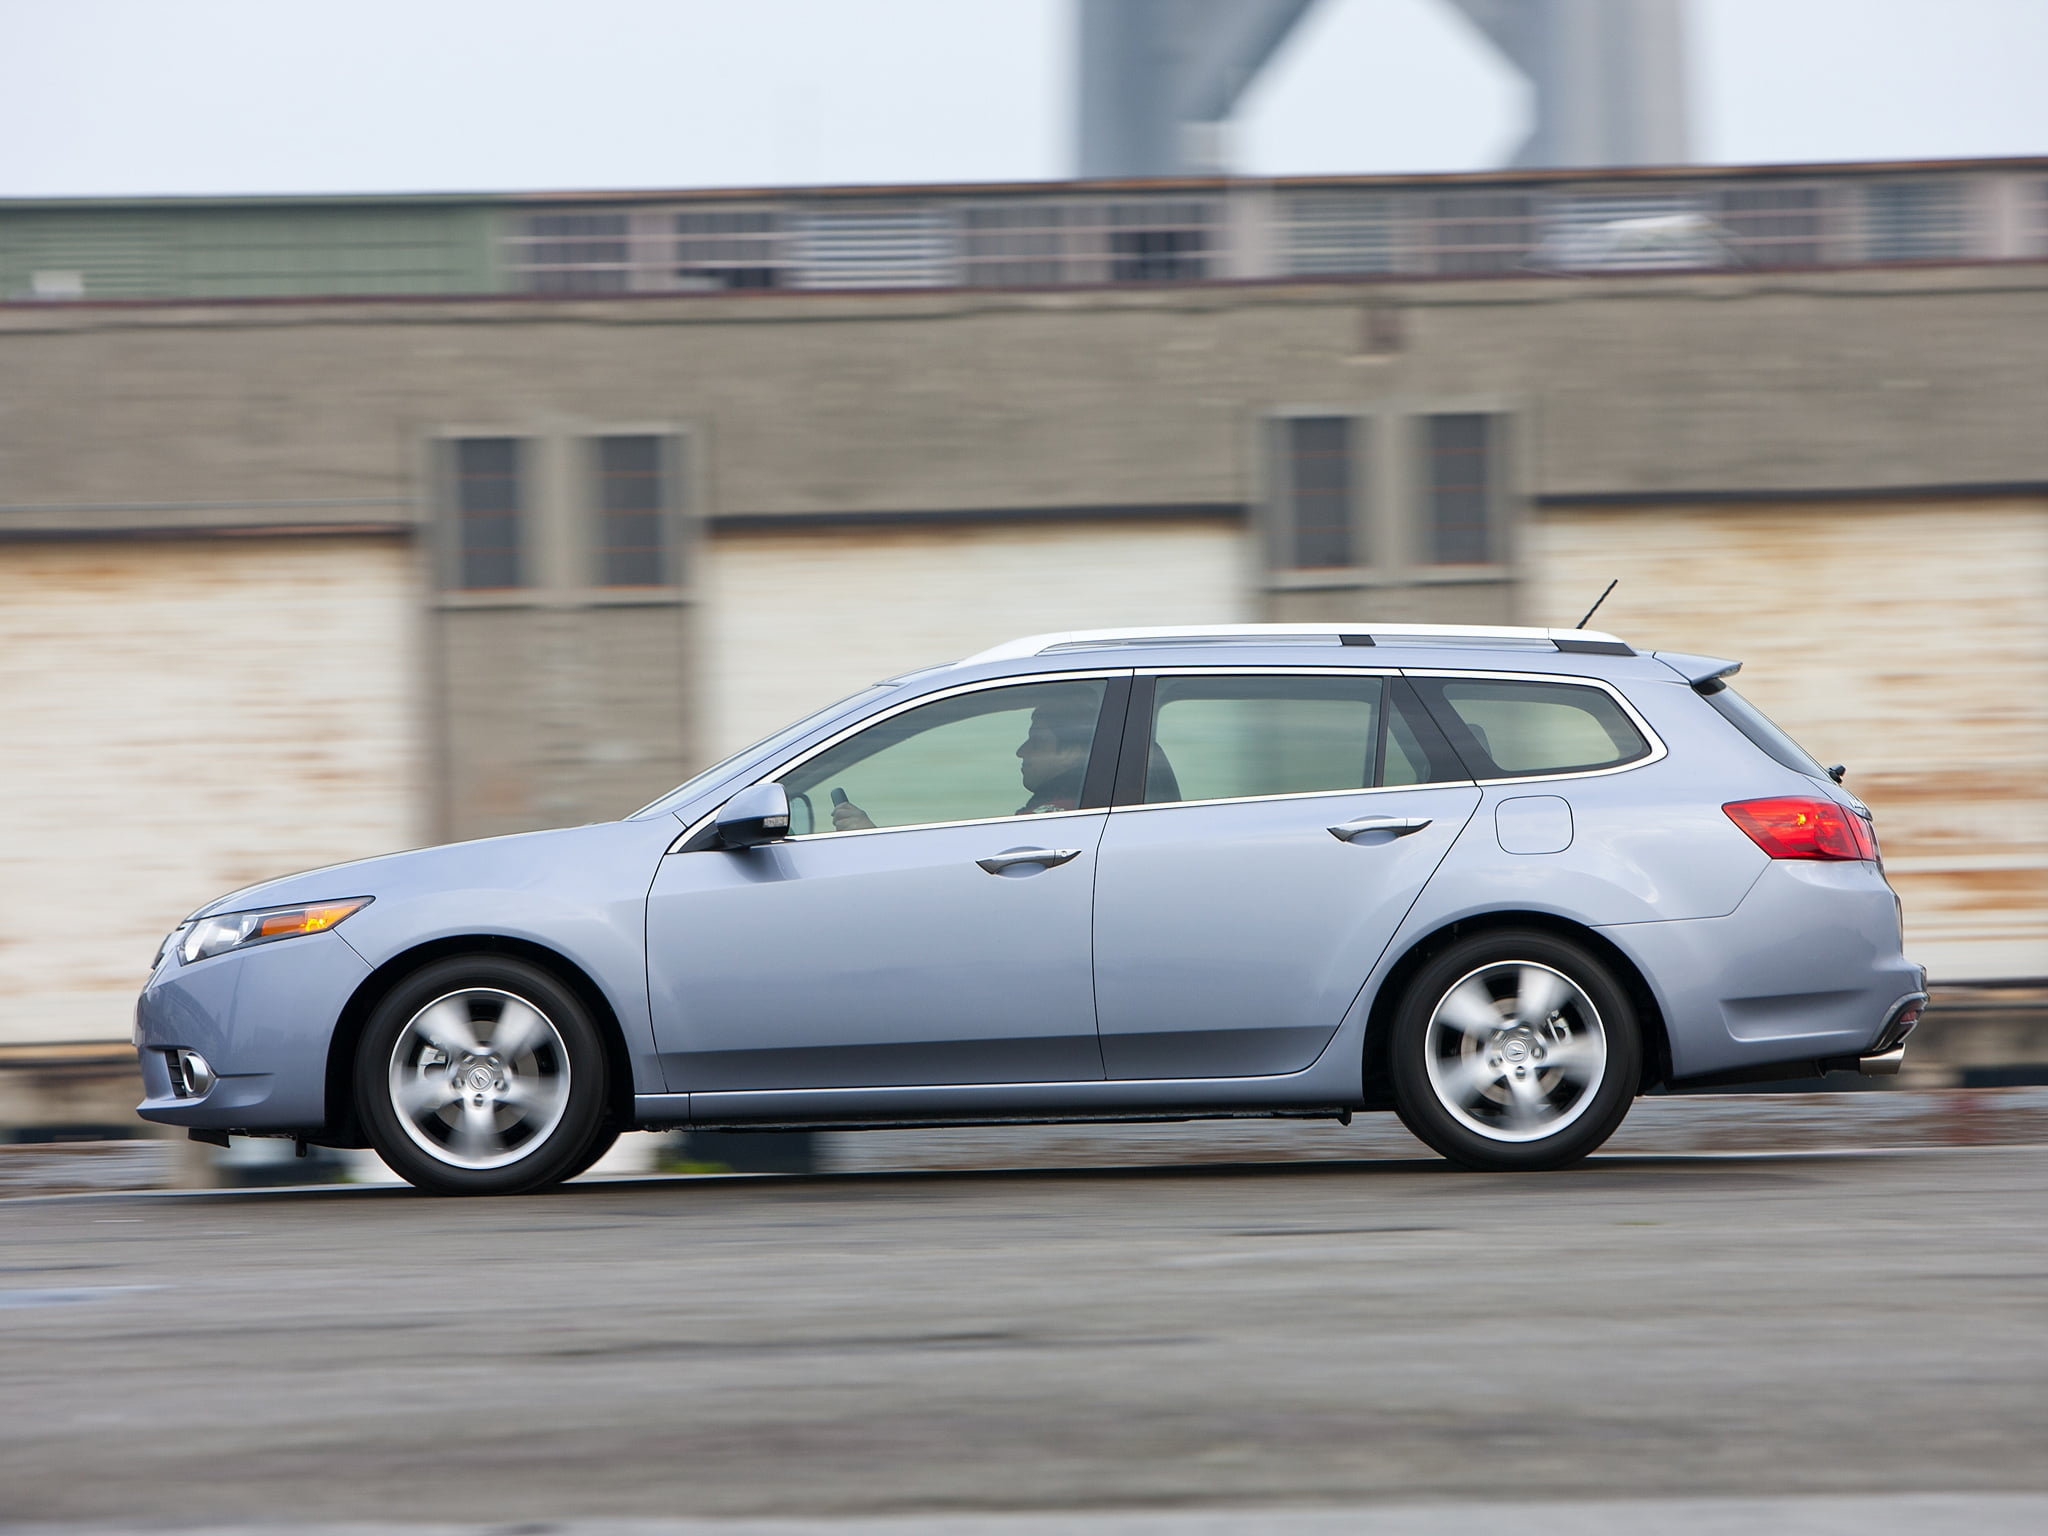 silver-colored stationwagon, acura, tsx, 2010, blue, style, cars